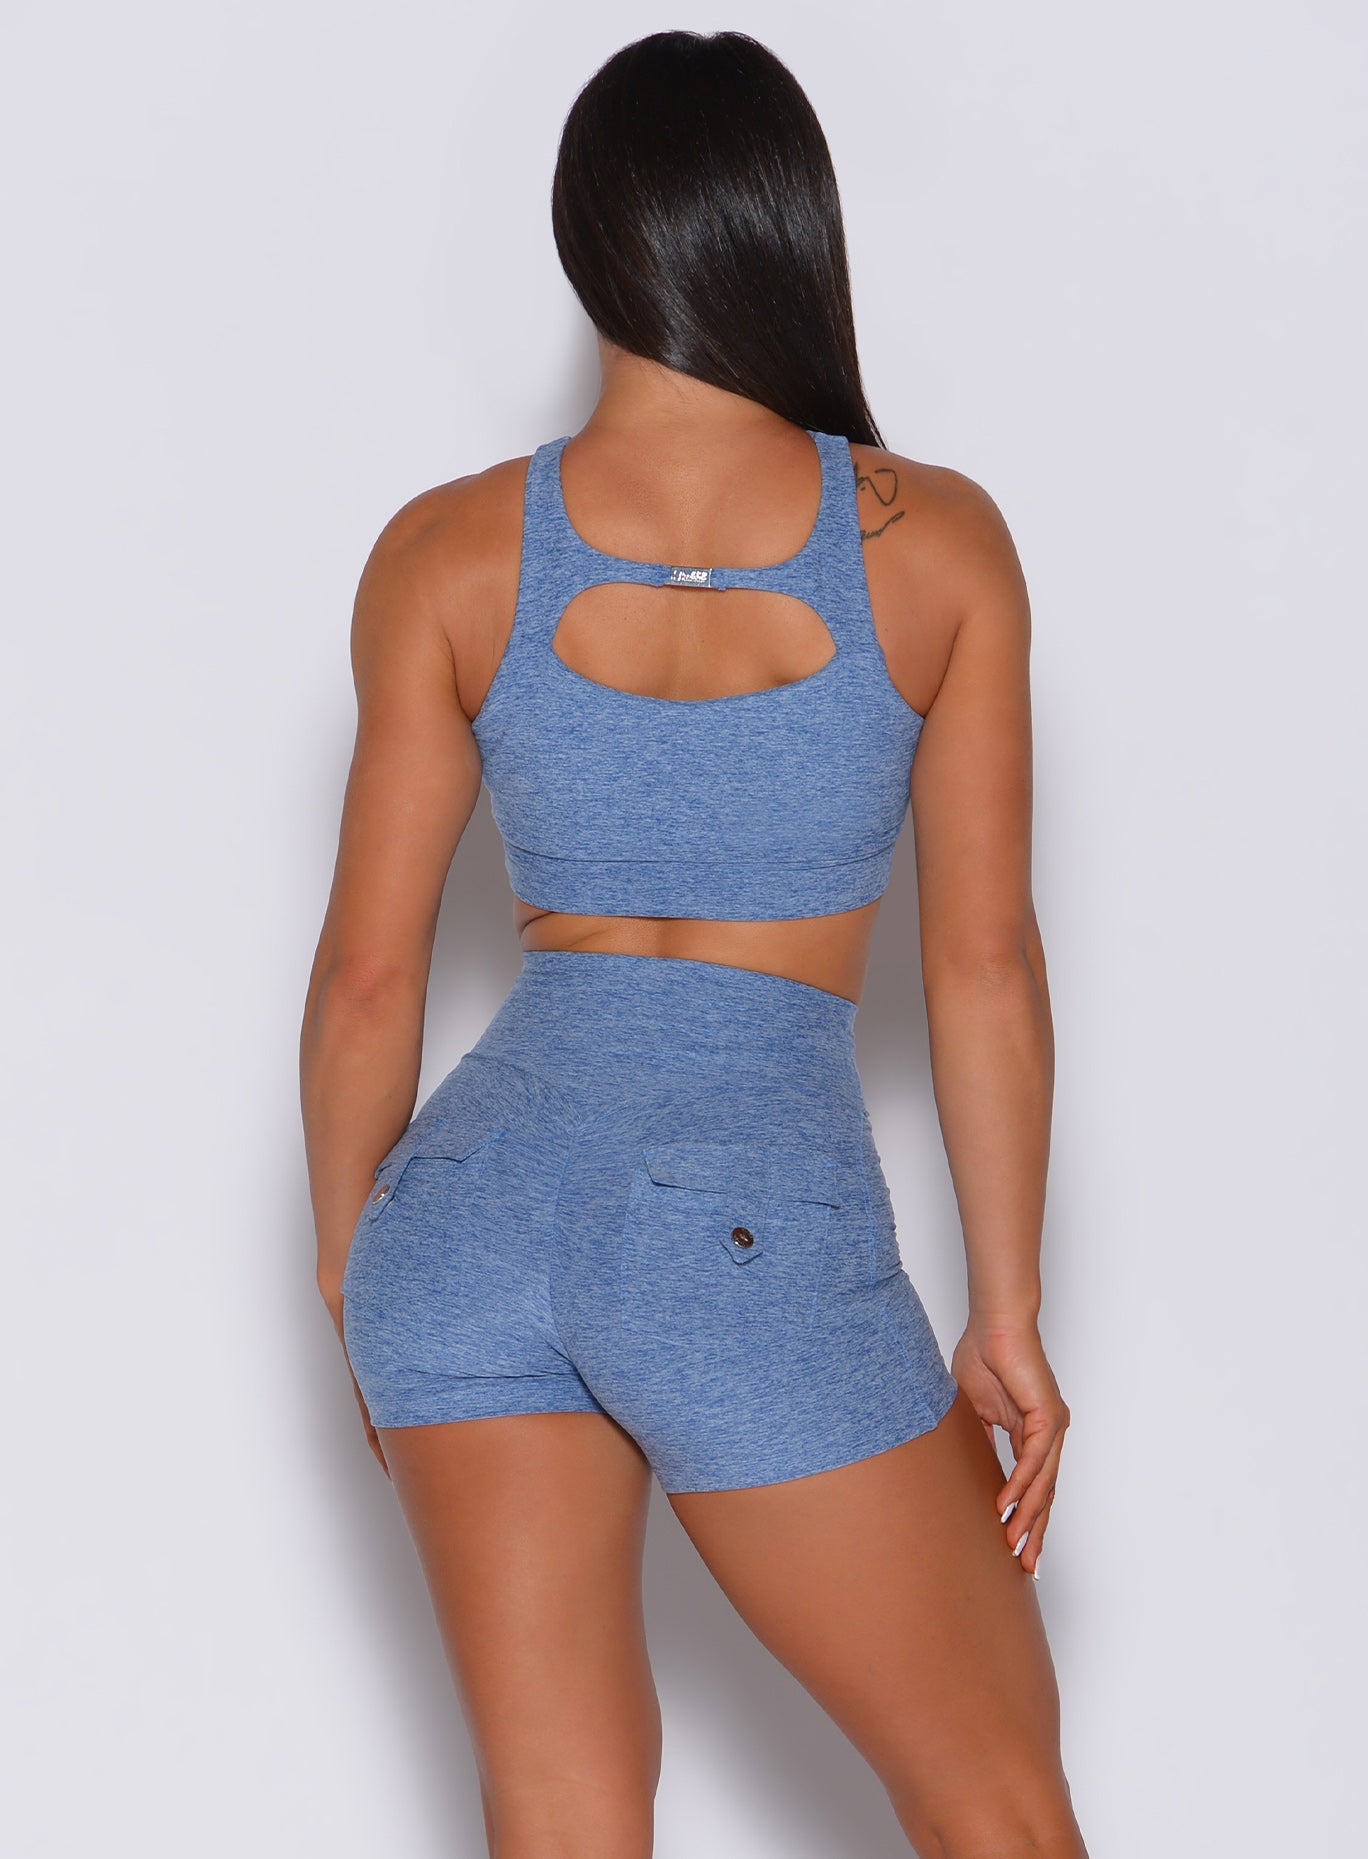 Back profile view of a model wearing our two way sports bra in sky blue color and a matching high waisted shorts